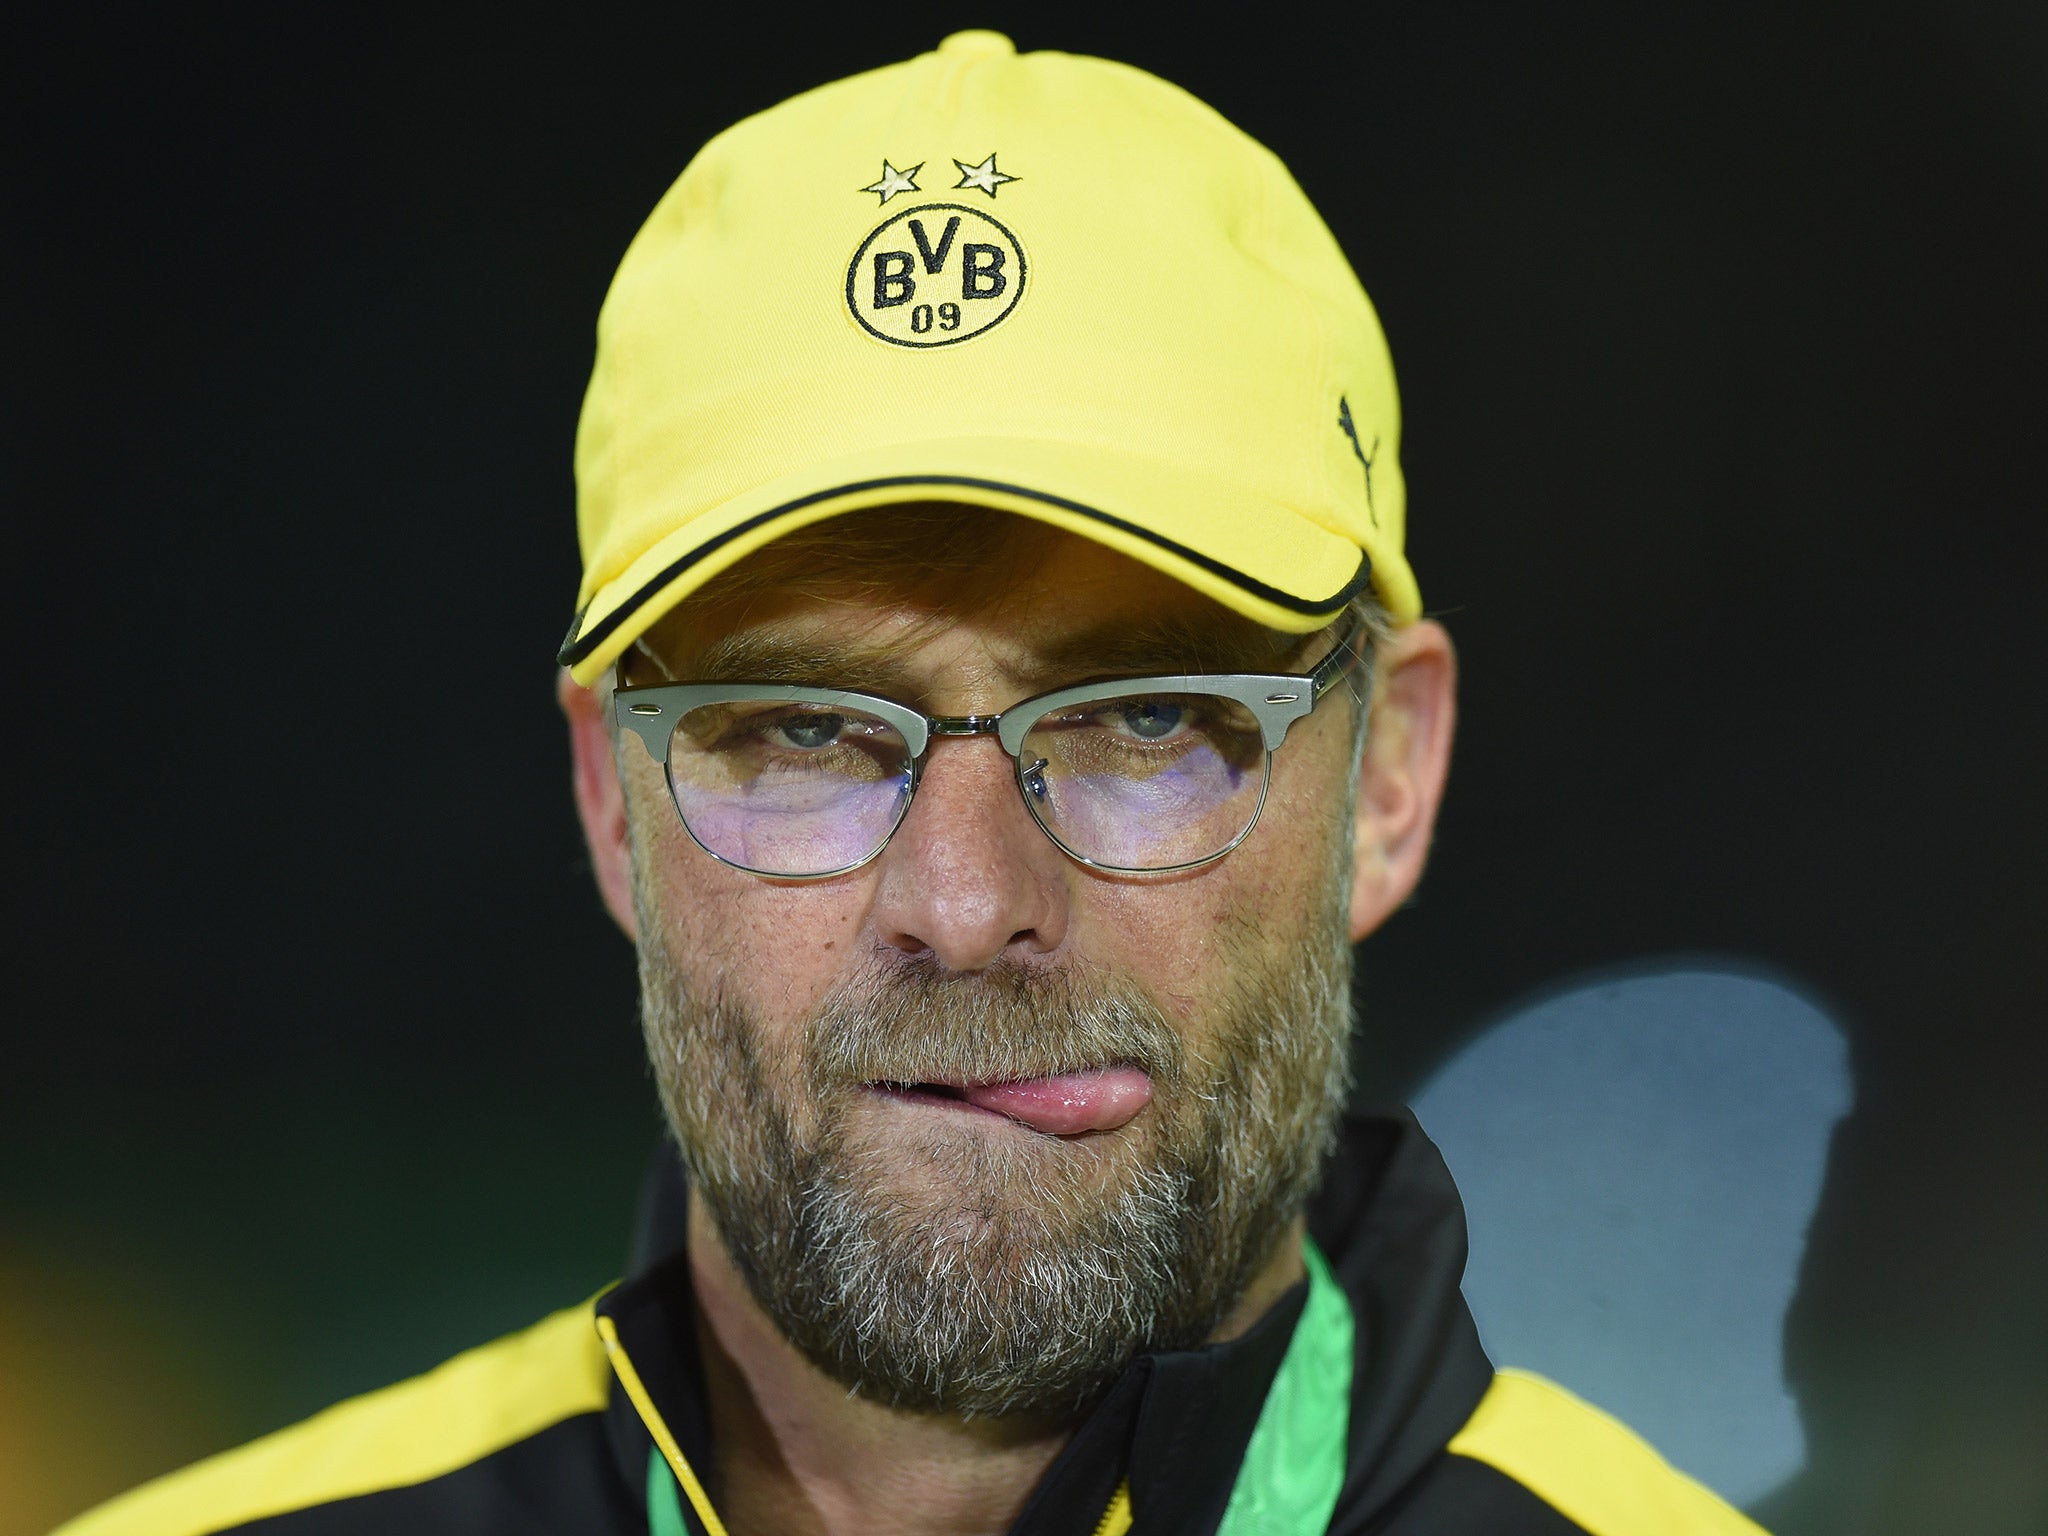 Jurgen Klopp is on the brink of being the new Liverpool manager